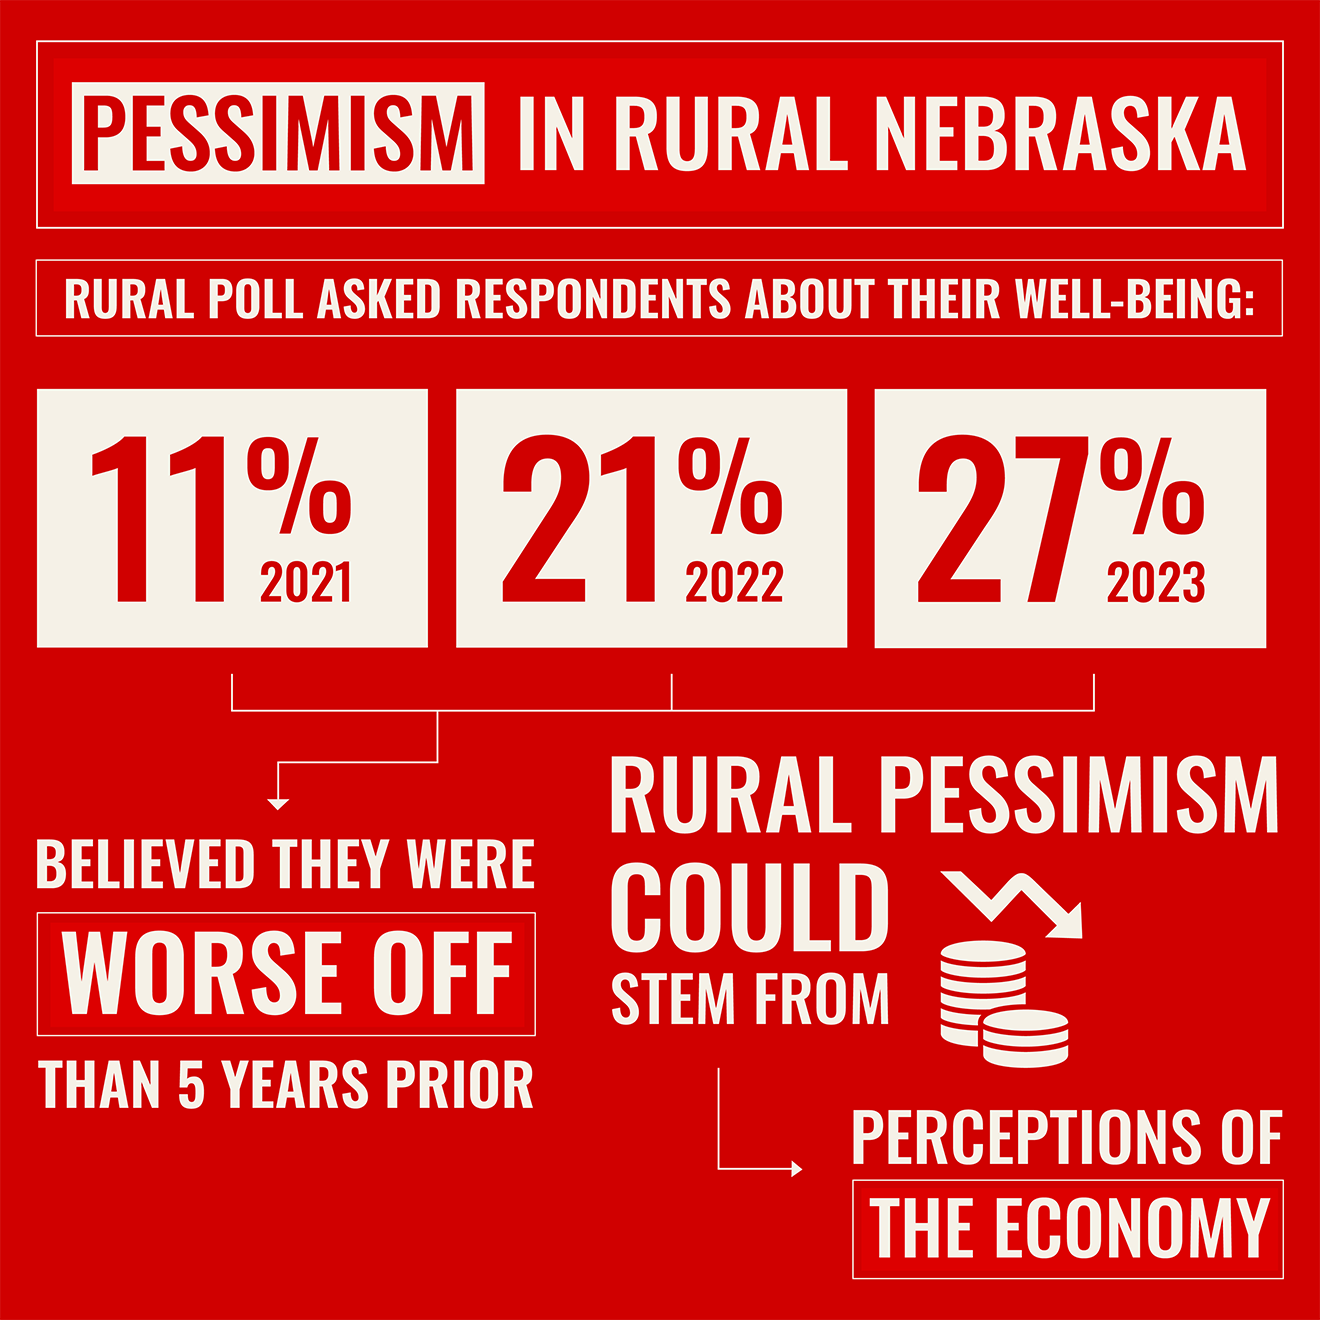 Red-and-white graphic that reads: "Pessimism in rural Nebraska. Rural Poll asked respondents about their well-being: 11% (2021), 21% (2022), 27% (2023) believed they were worse off than five years prior. Rural pessimism could stem from perceptions of the economy."